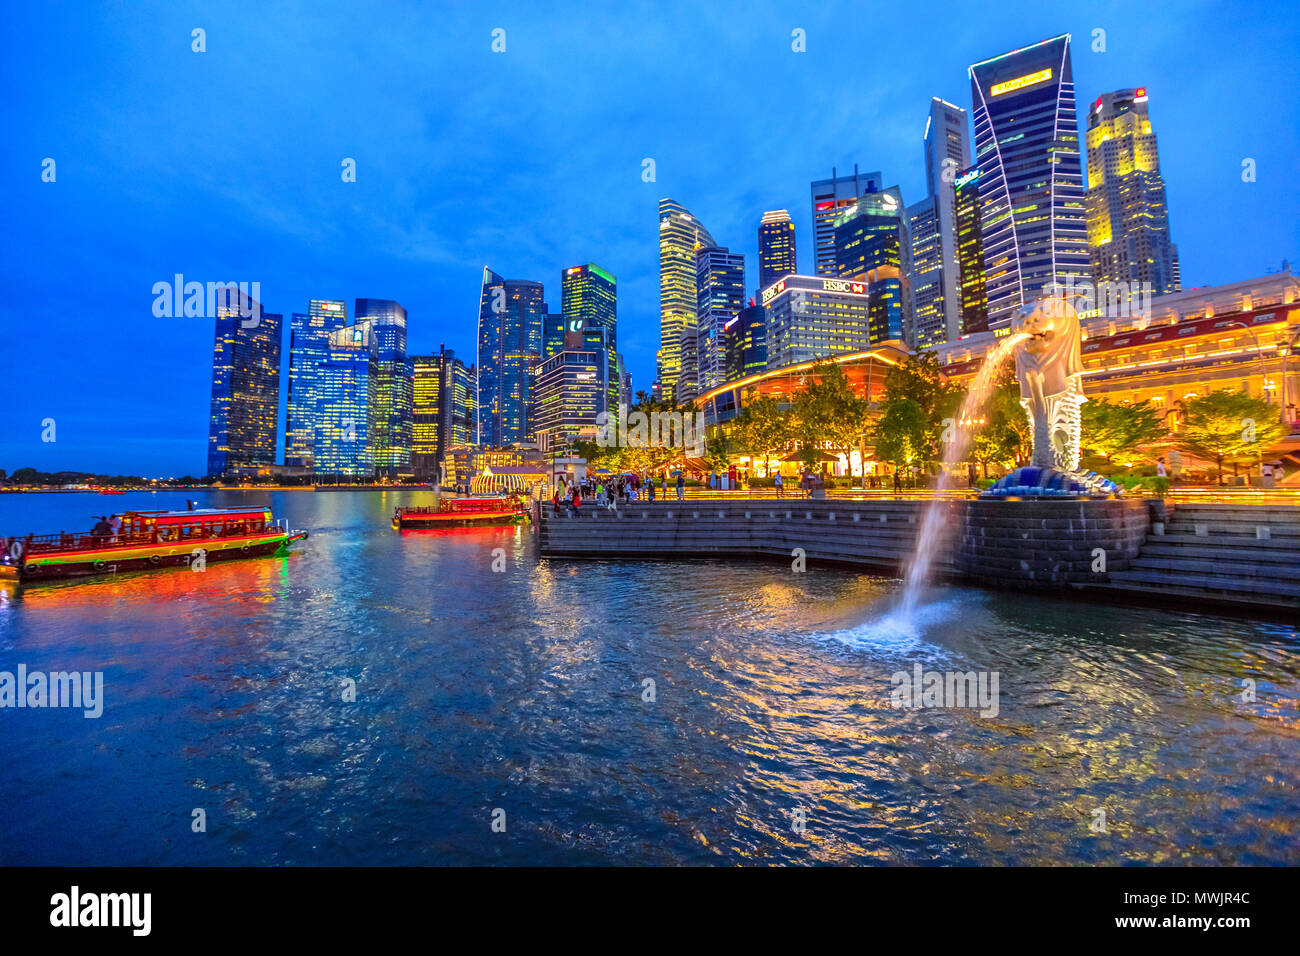 Singapore - April 27, 2018: Merlion Statue icon of Singapore with Central Business District or the CBD Buildings on background in Marina Bay, Central Area in Singapore at blue hour. Stock Photo